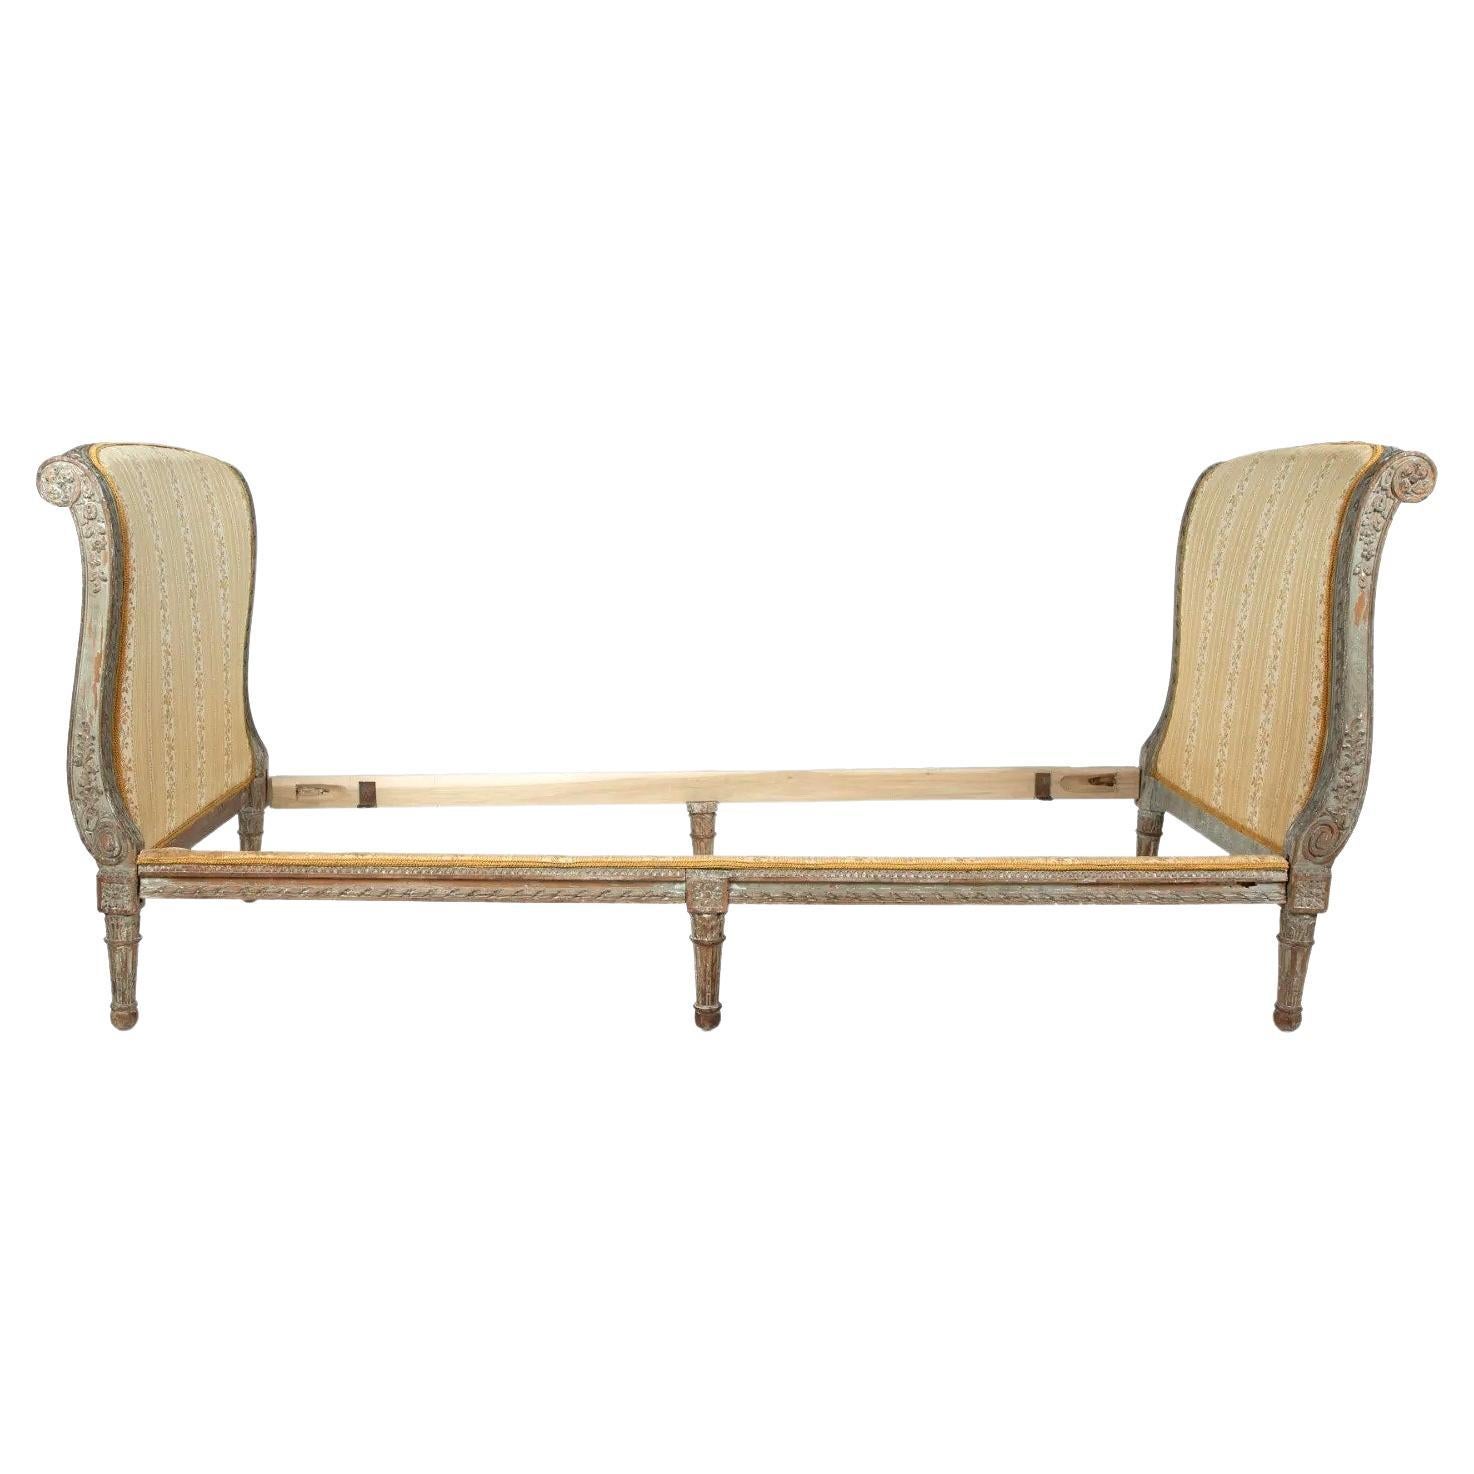 Louis XVI Daybed, 18th C. French